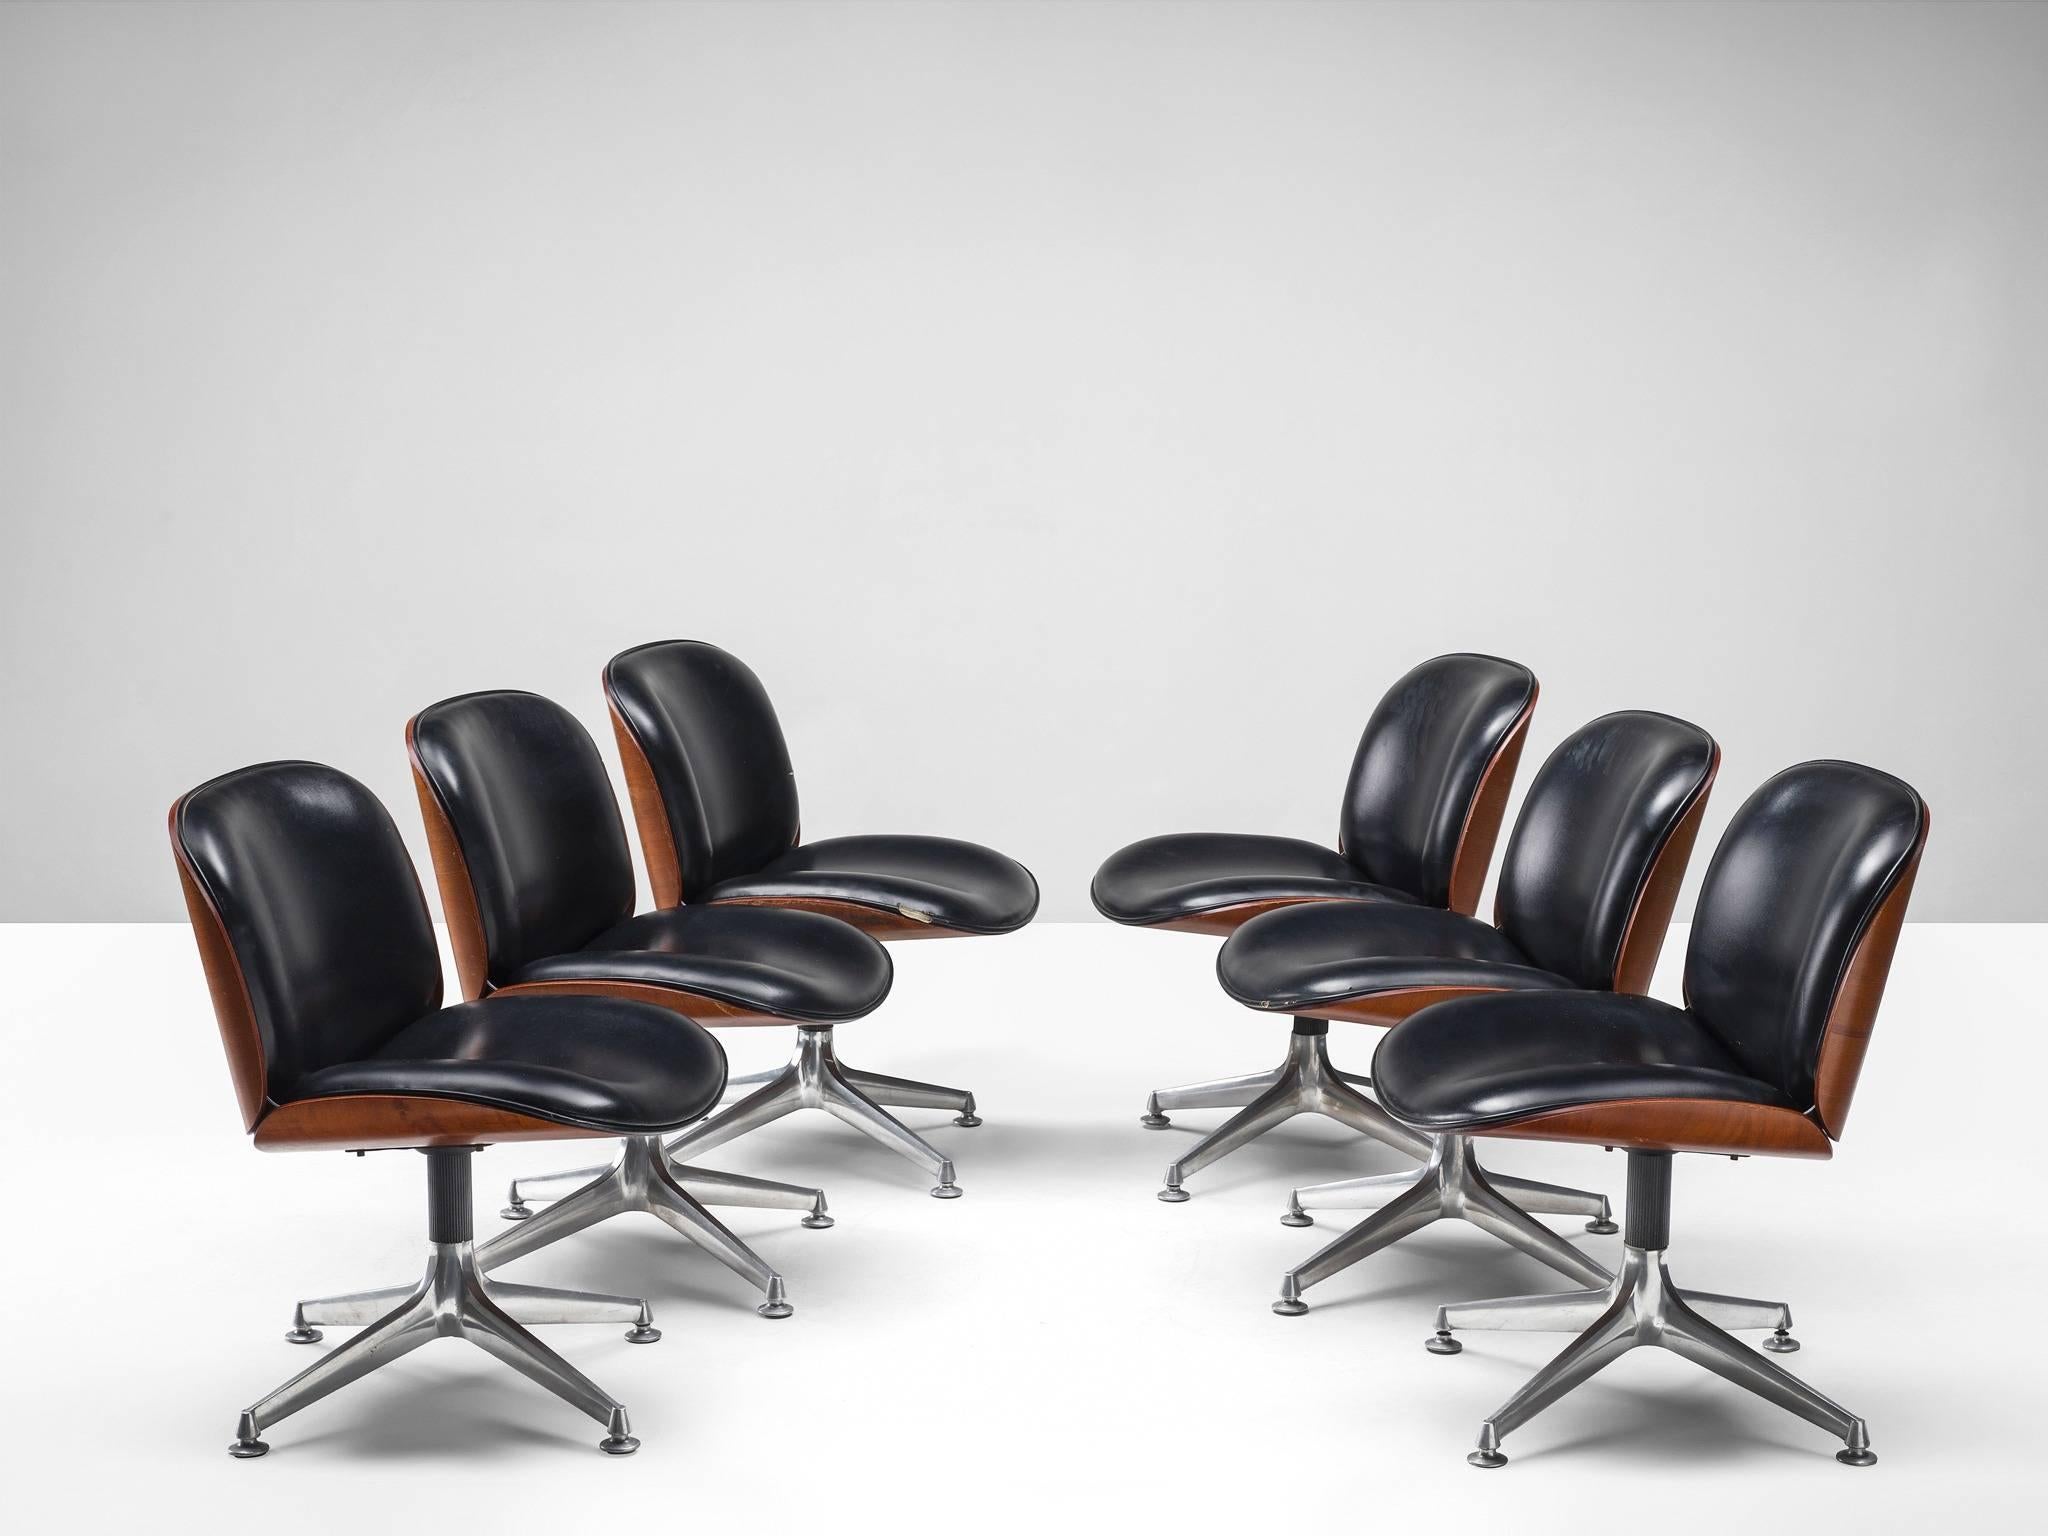 Set of six desk chairs, in metal, faux-leather and veneered walnut by Ico Parisi for MIM Roma, Italy, 1950s.

Set of six office chairs from the 'Terni' series of Ico Parisi for MIM Roma. These chairs have the characteristic shell of Ico Parisi.